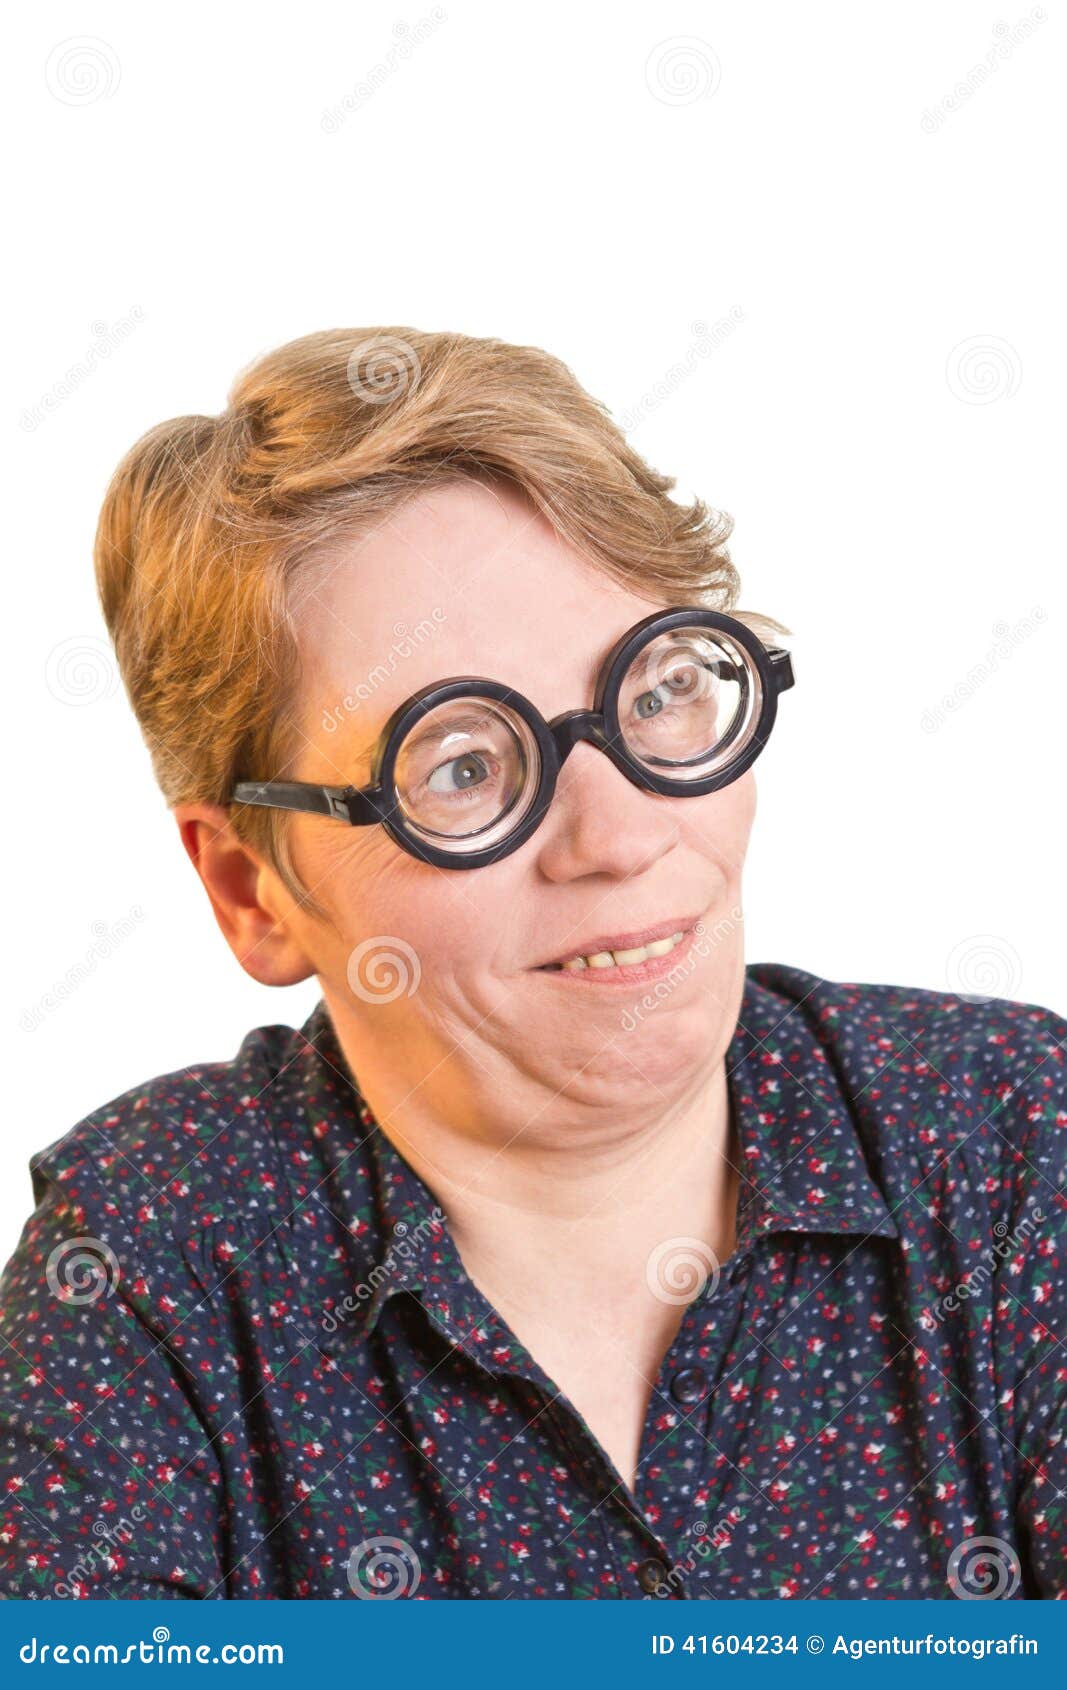 Silly Looking Woman Thick Glasses Stock Photo - Image of portrait, nerd ... People With Thick Glasses